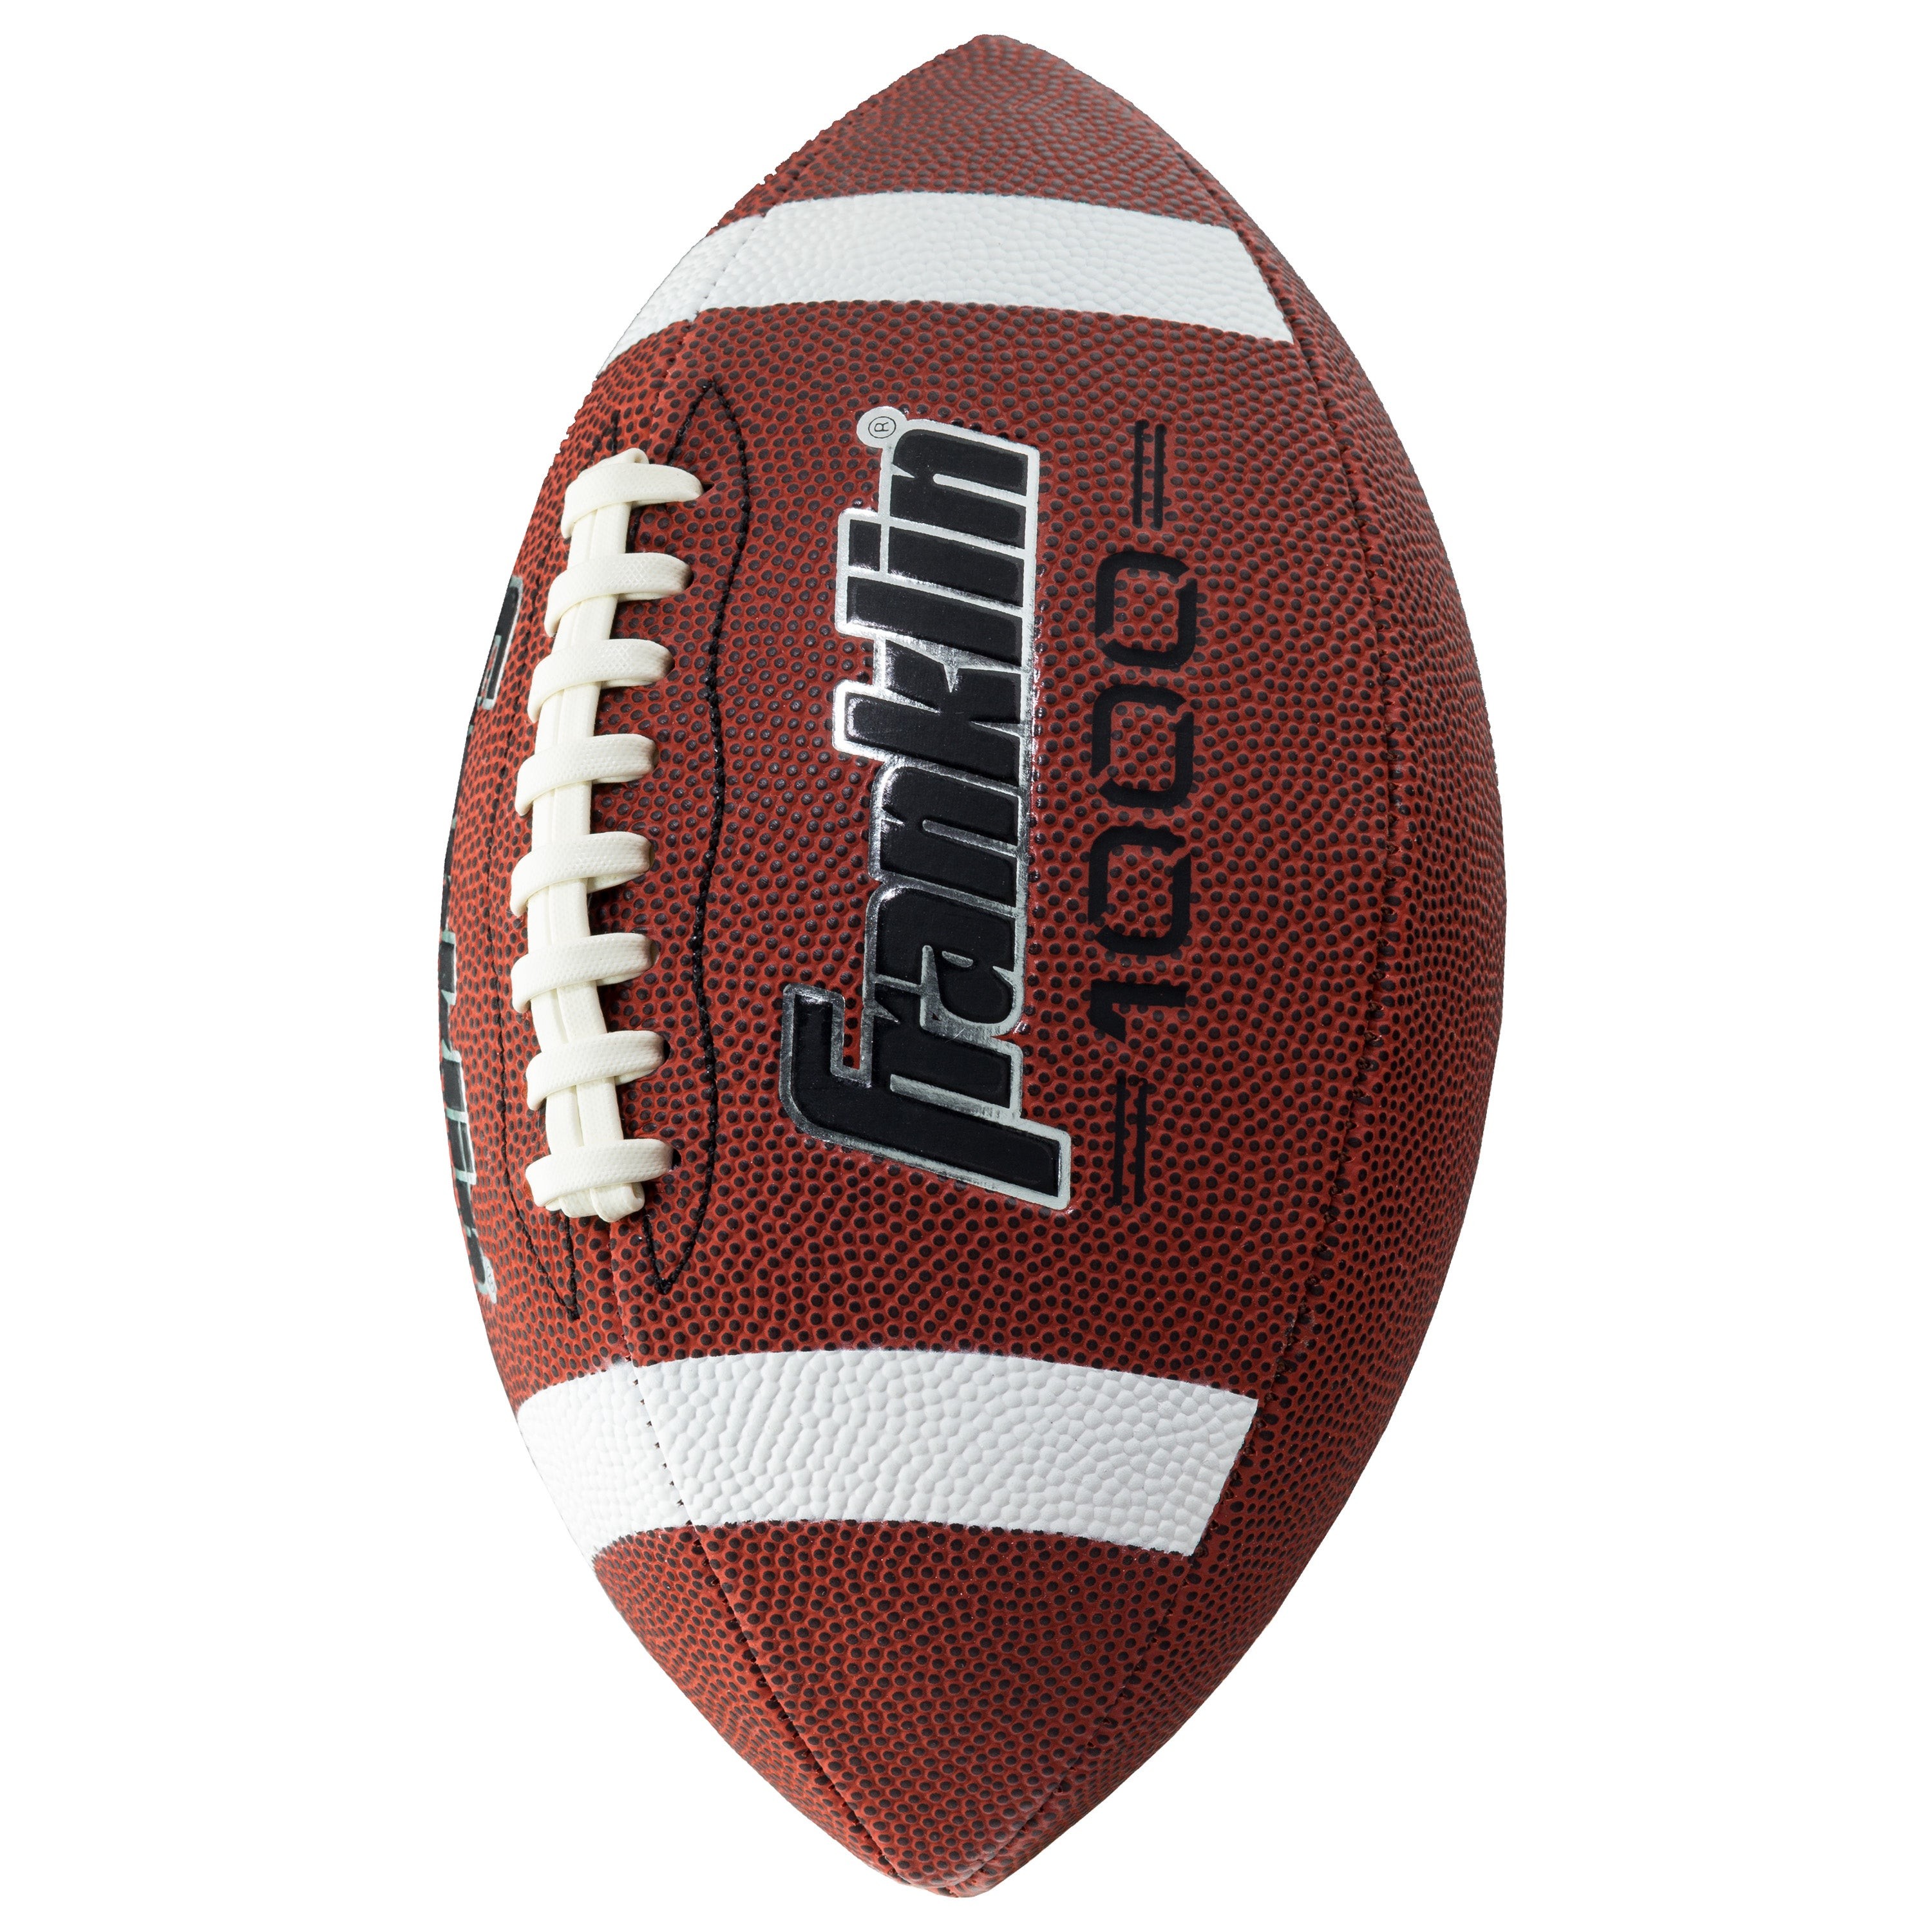 Grip-Rite Official Size Composite Football